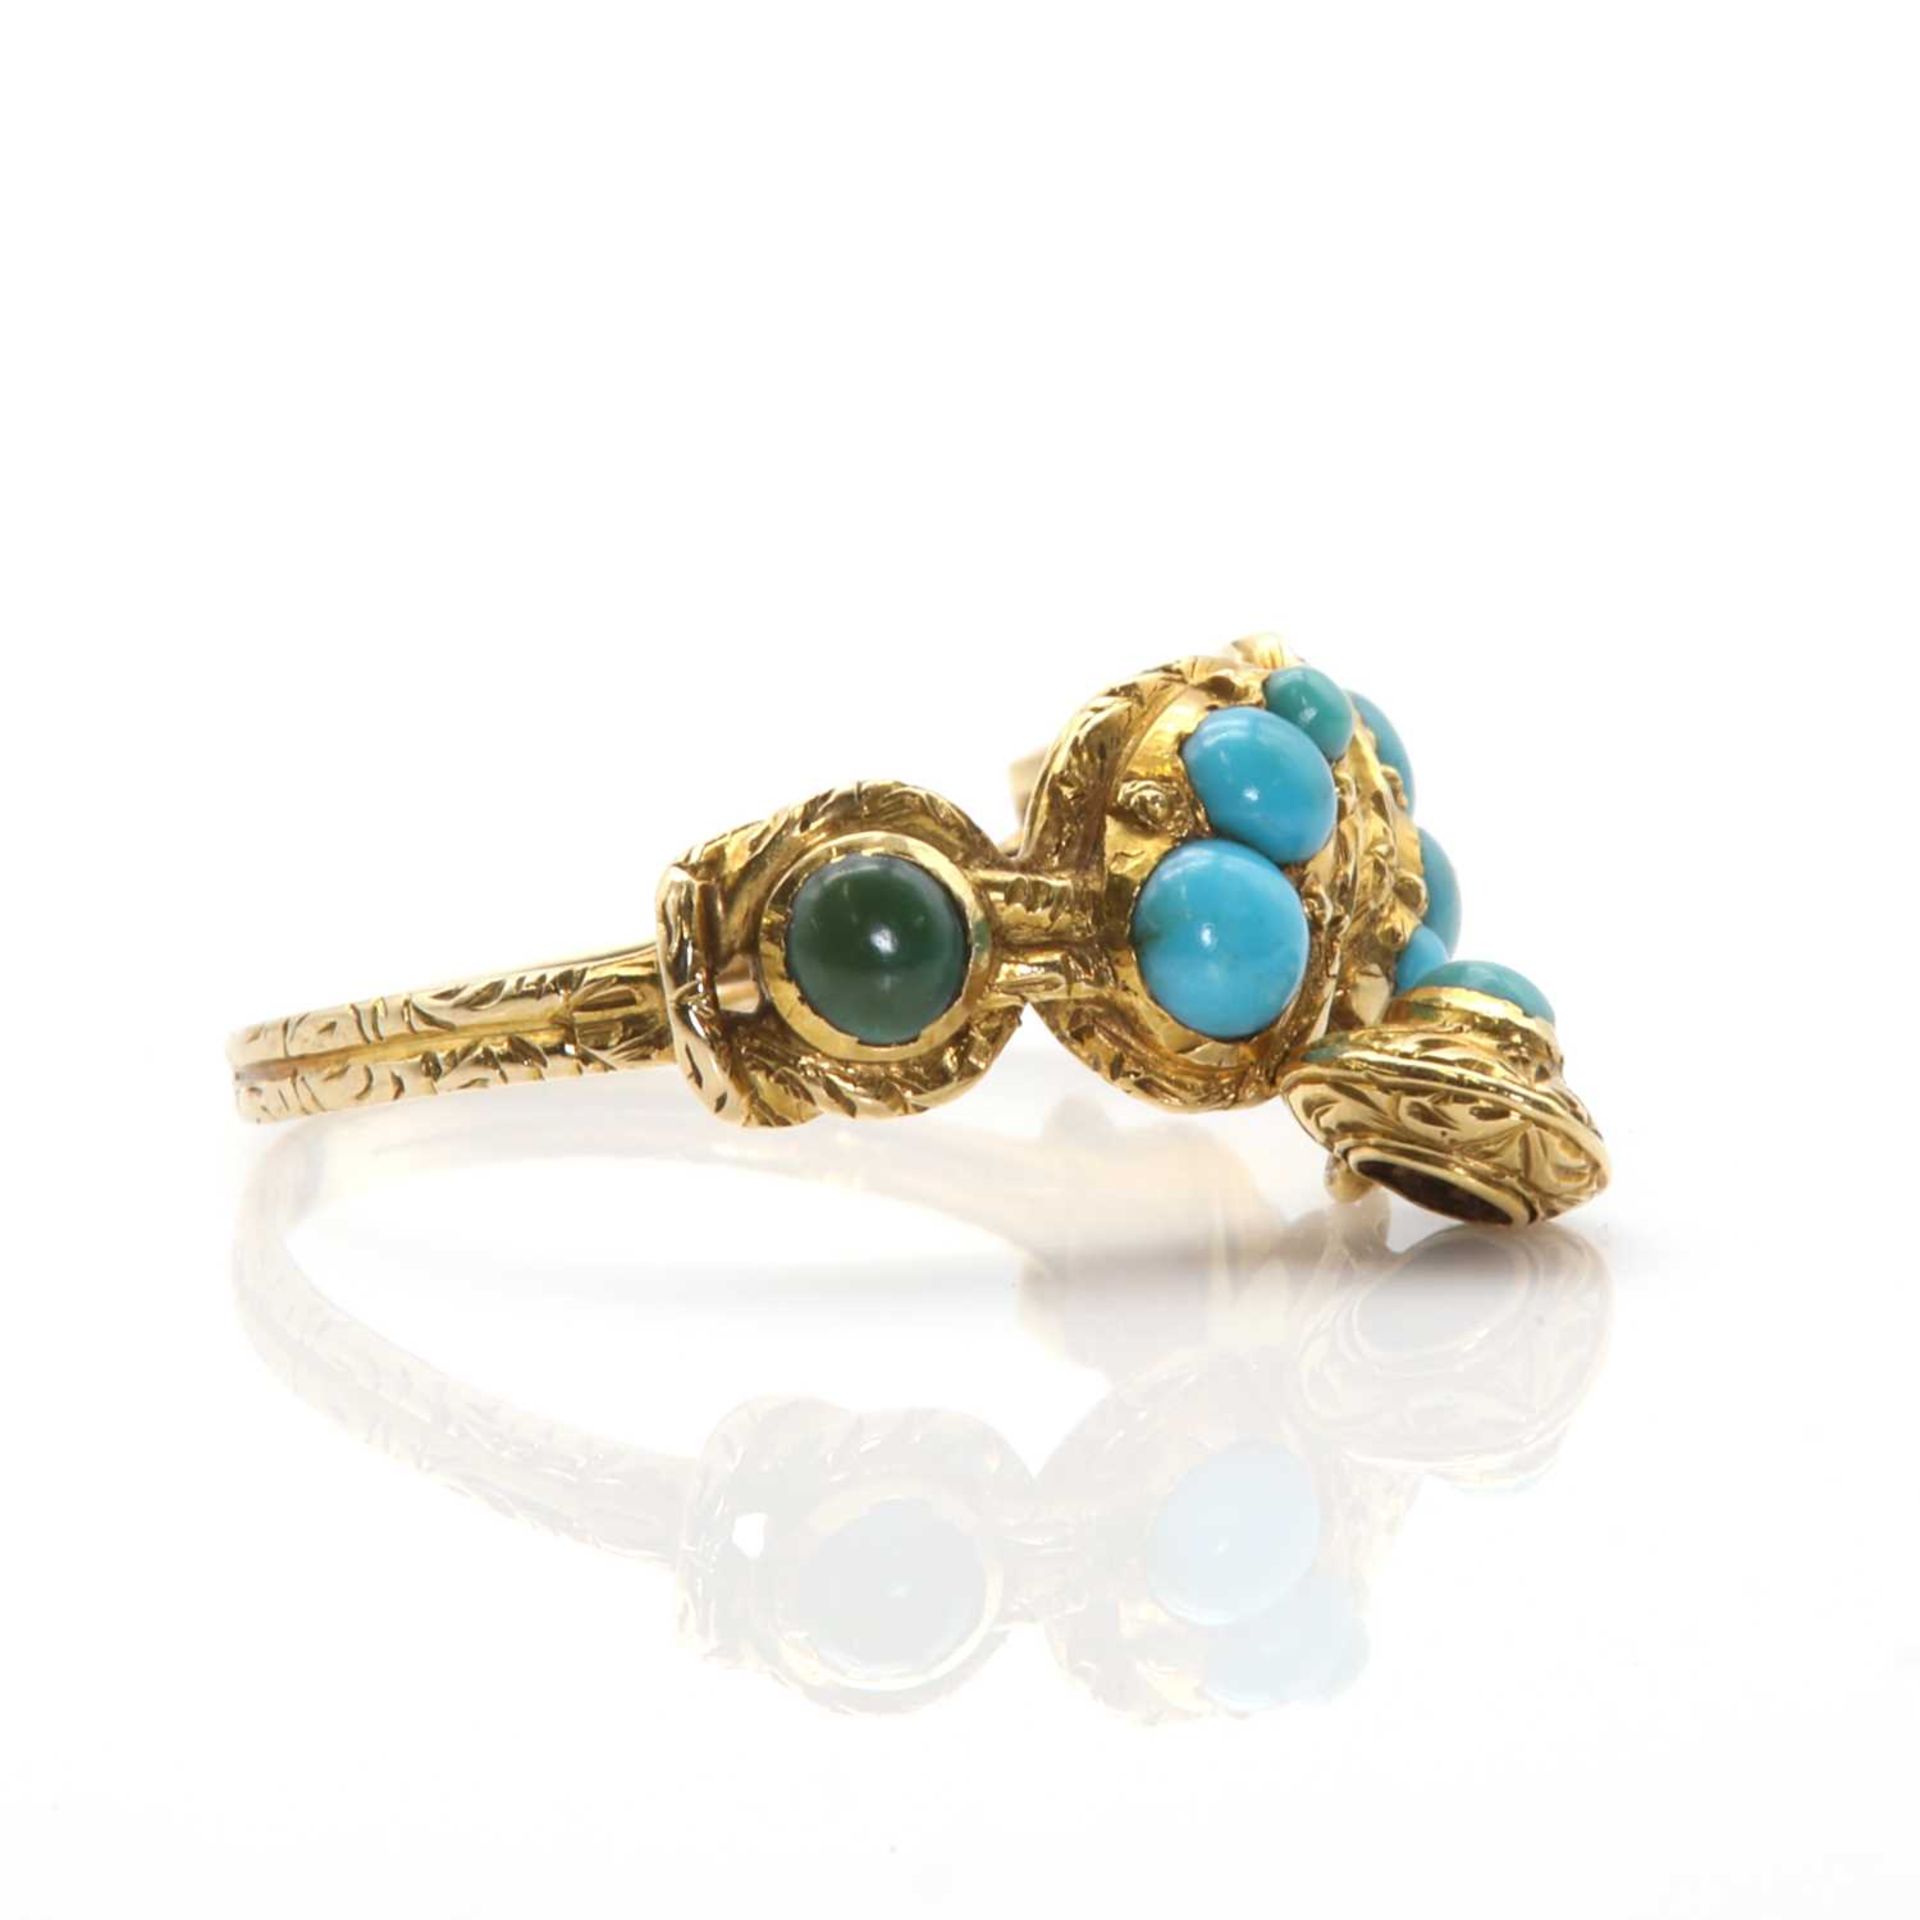 A Victorian gold and turquoise serpent knot ring, - Image 2 of 3